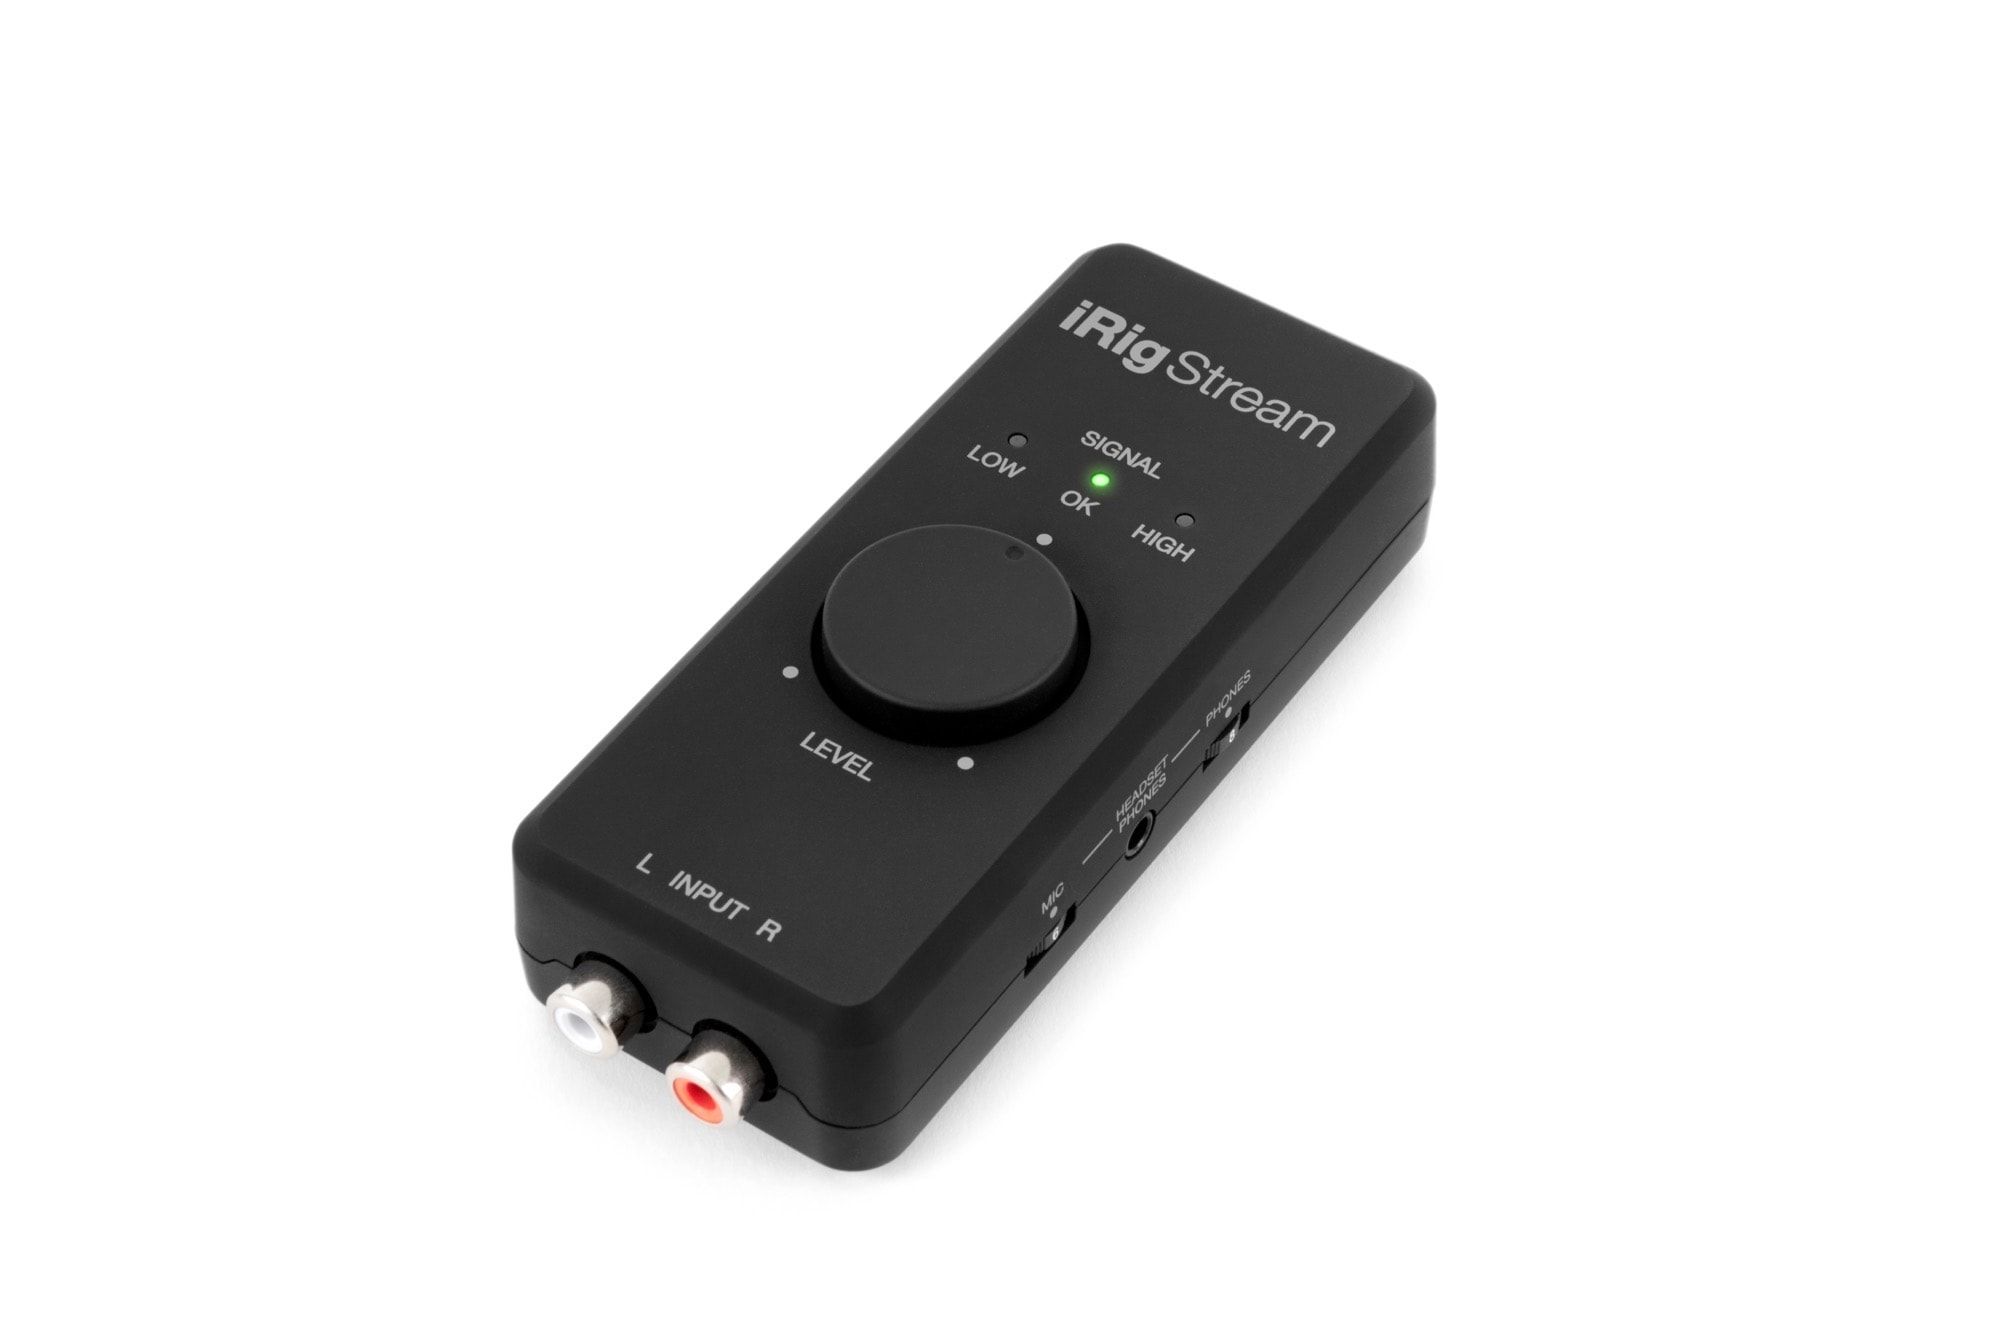 The iRig Stream is small, and sounds very handy. 